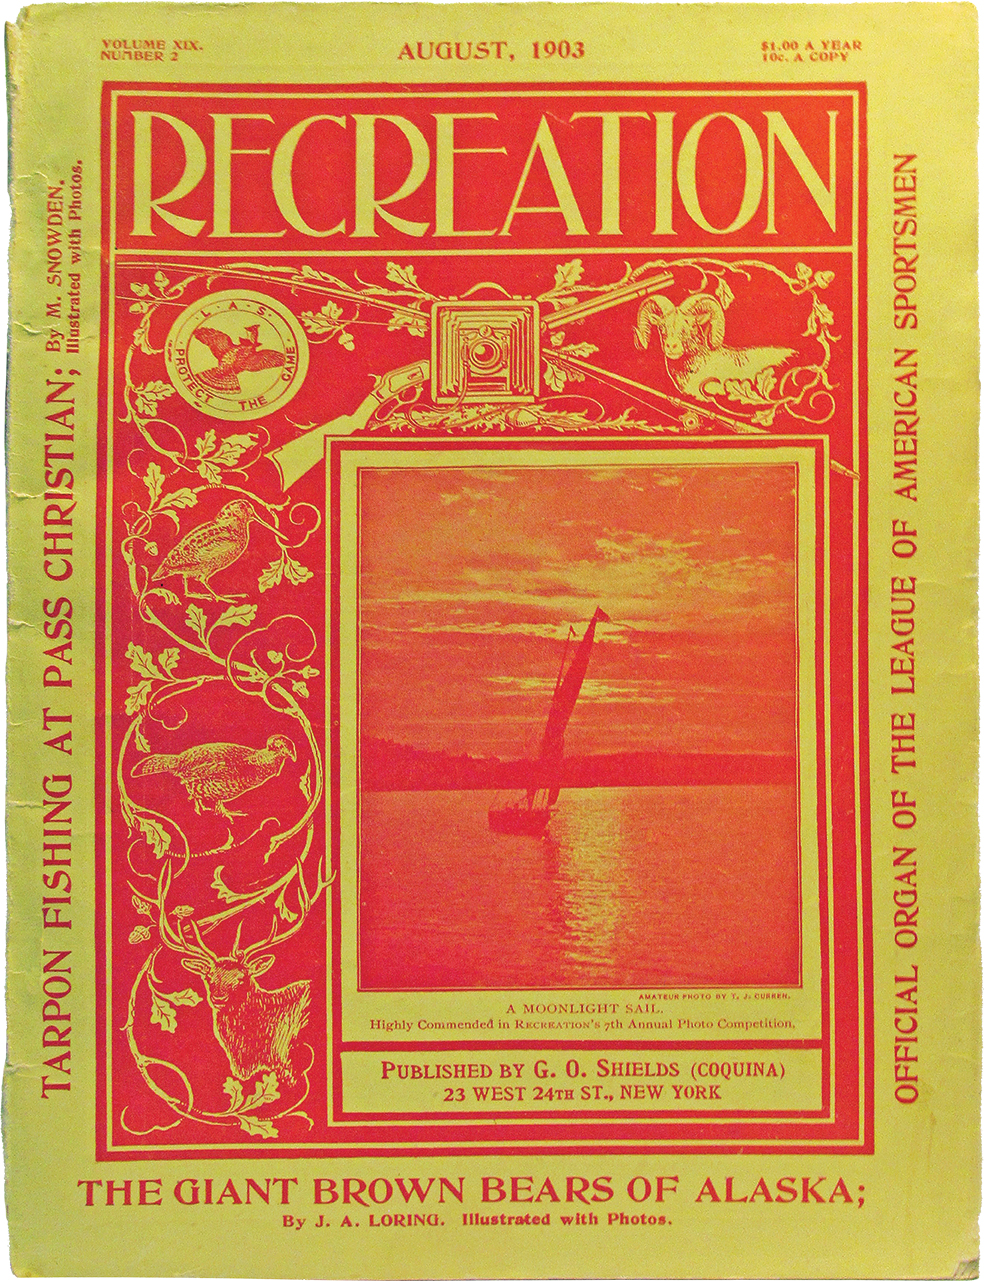 Typical of Recreation cover under G.O. Shields editorship – this one dated August, 1903.